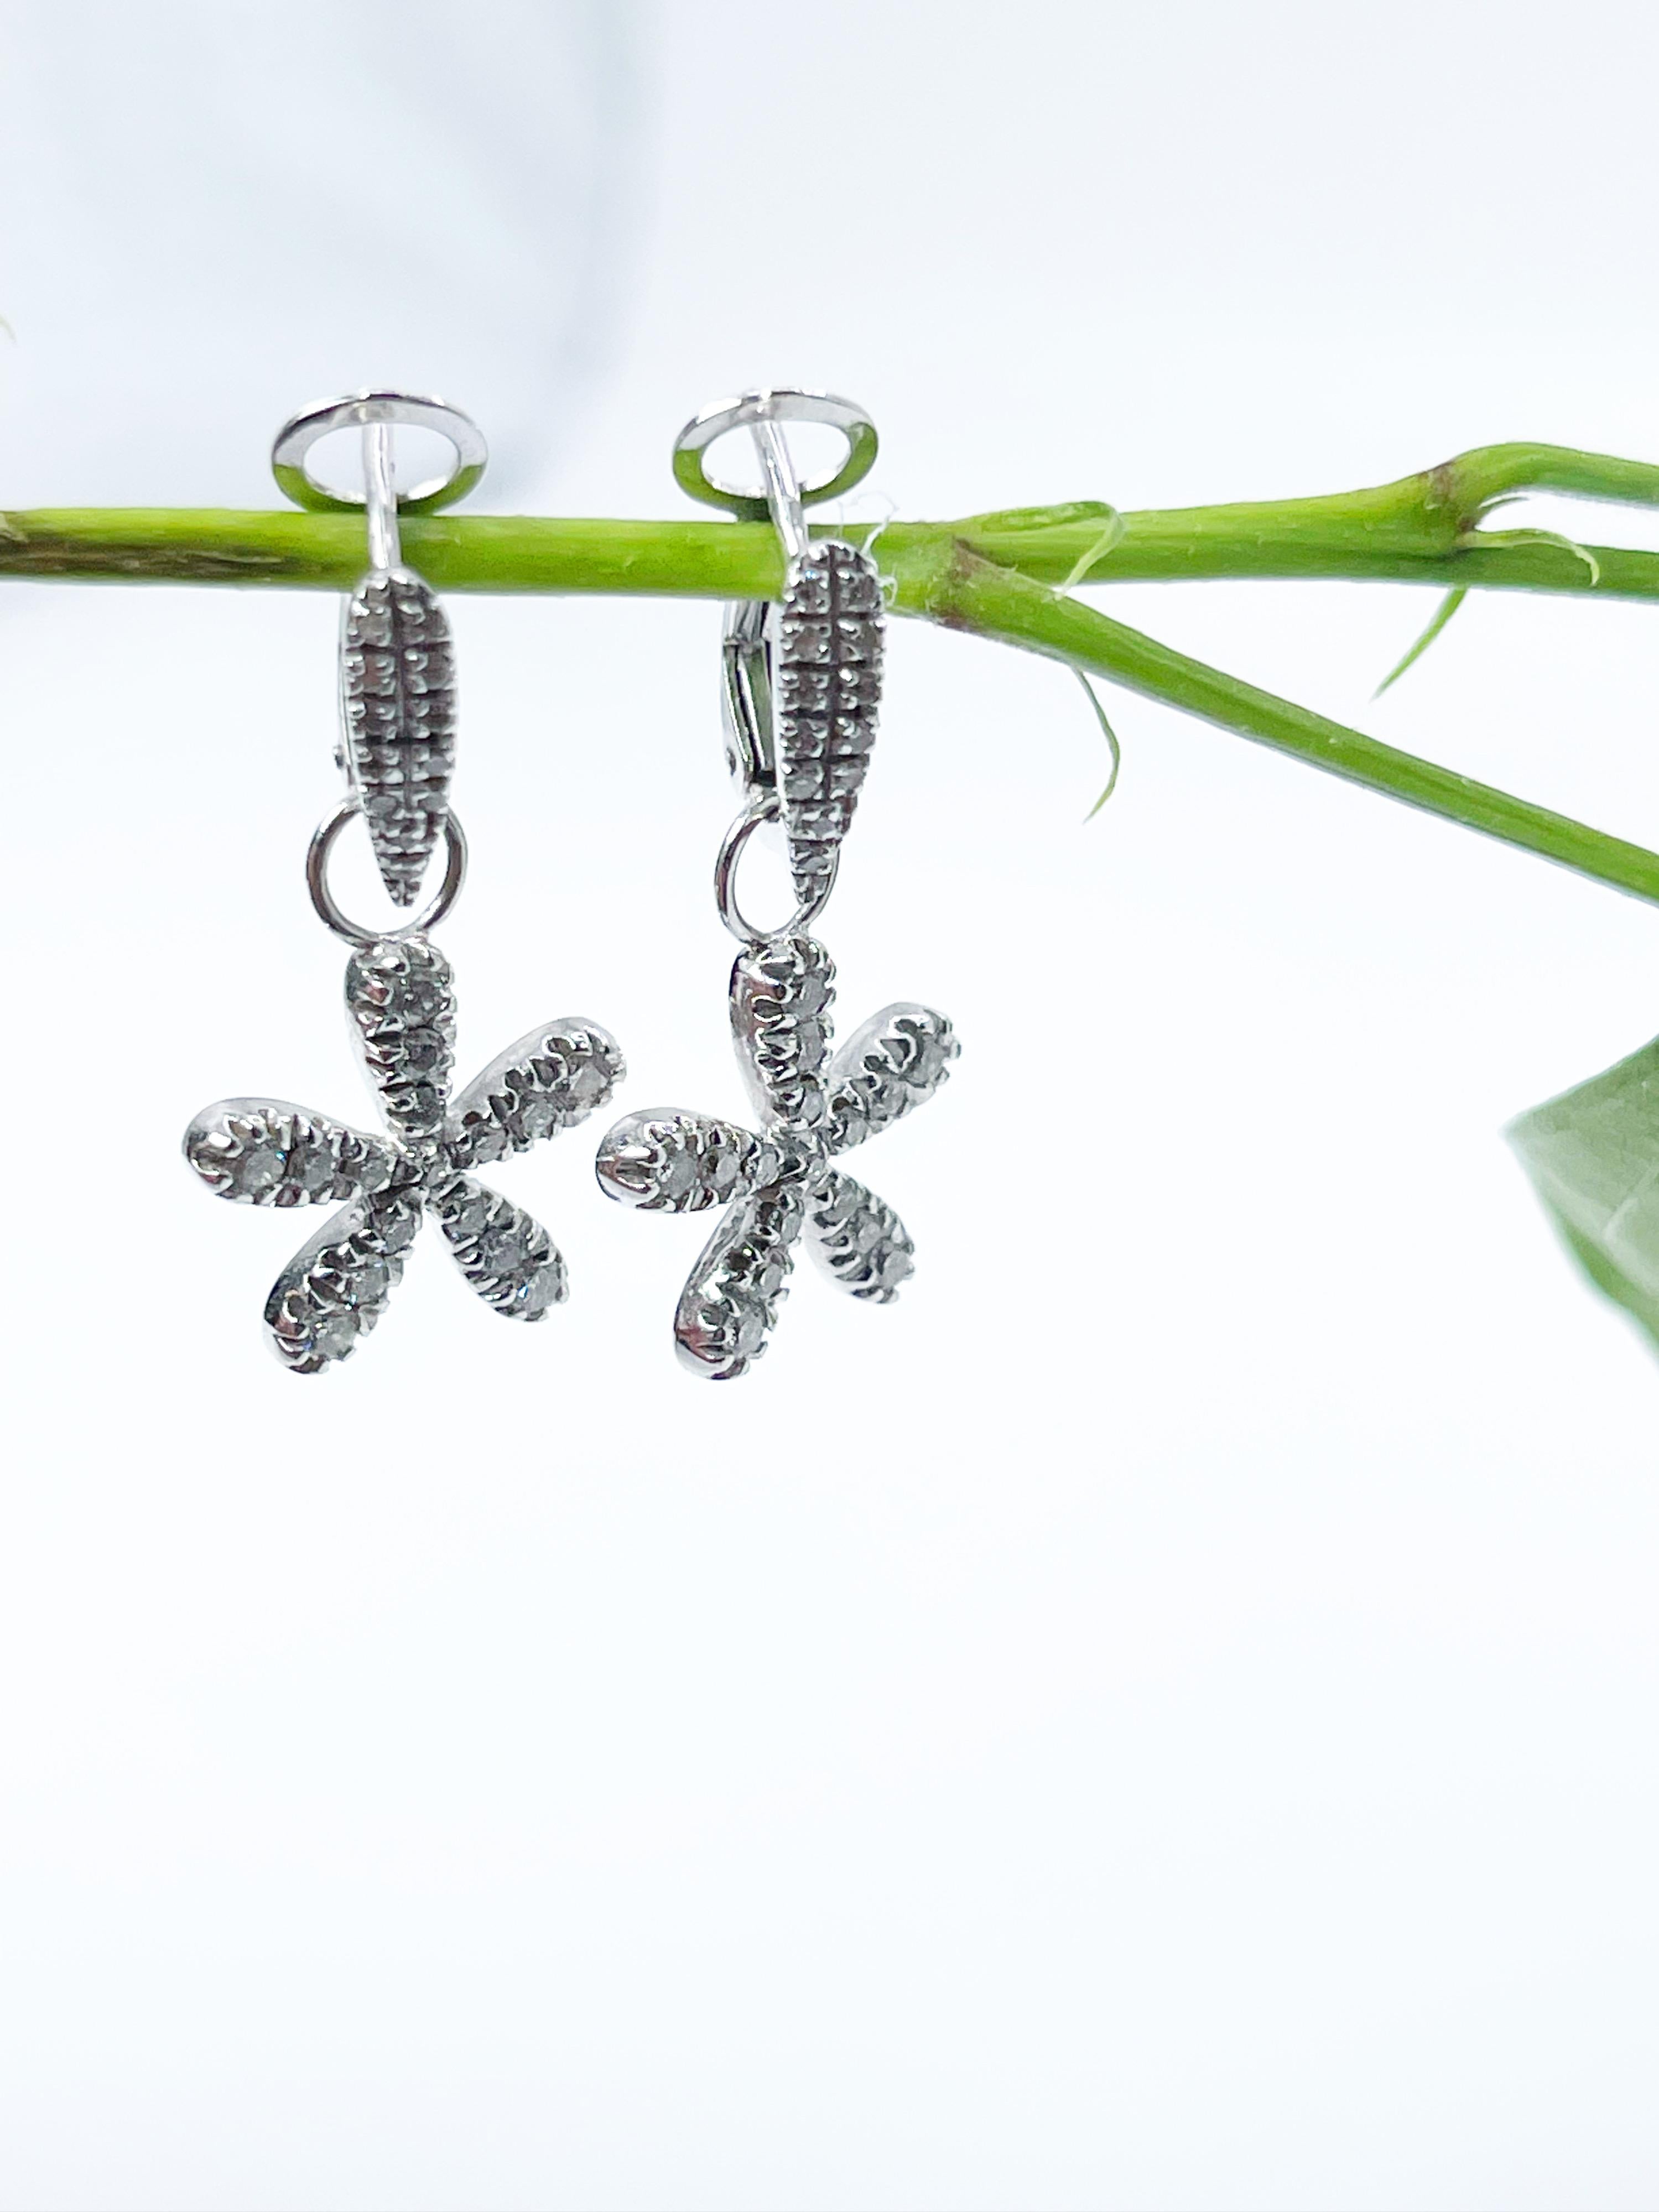 Flower earrings made with natural diamonds in 18KT white gold, the flowers unattach. The earrings are fun and dangling. Purchase comes with certificate and box, ready for gifting!

CENTER STONE: NATURAL DIAMONDS
CARAT: 0.40CT
CLARITY: SI
COLOR: